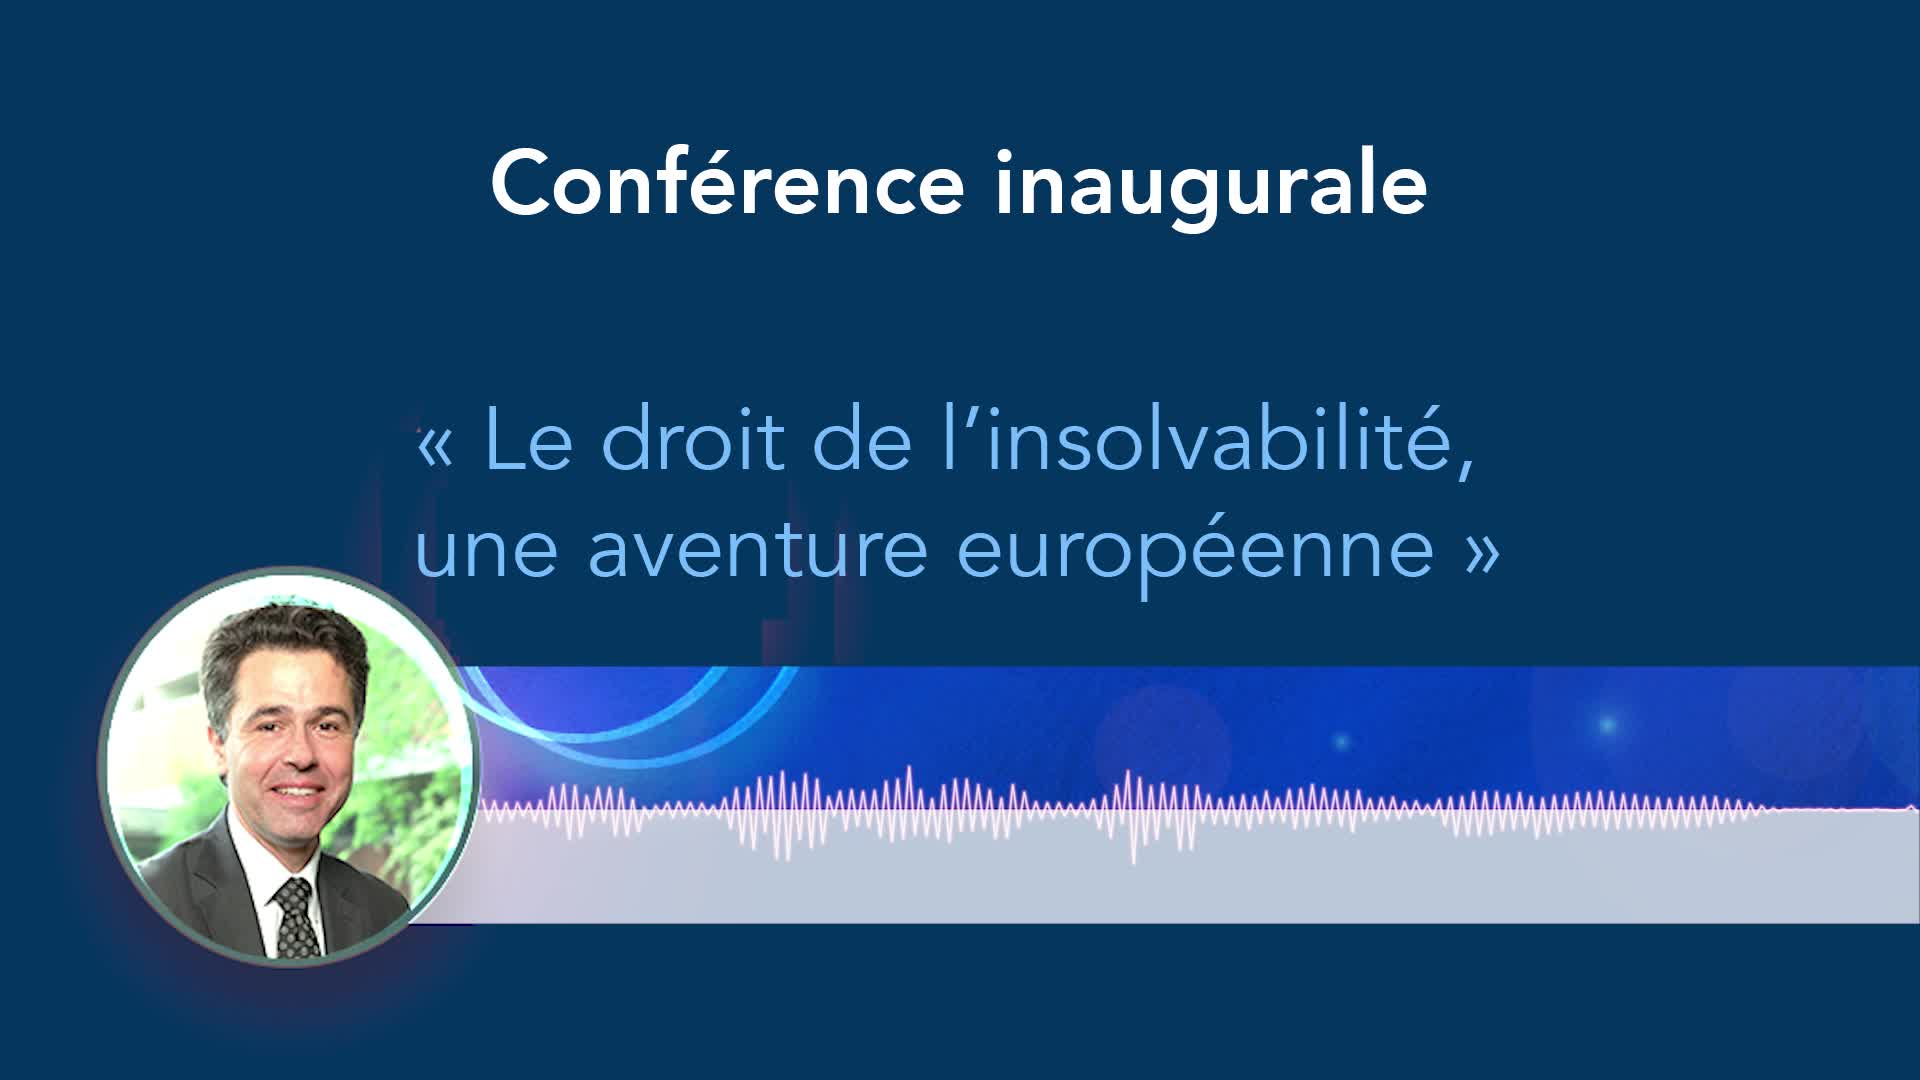 vp-extrait2-conferenceinaugurale-chaireeurins.mp4